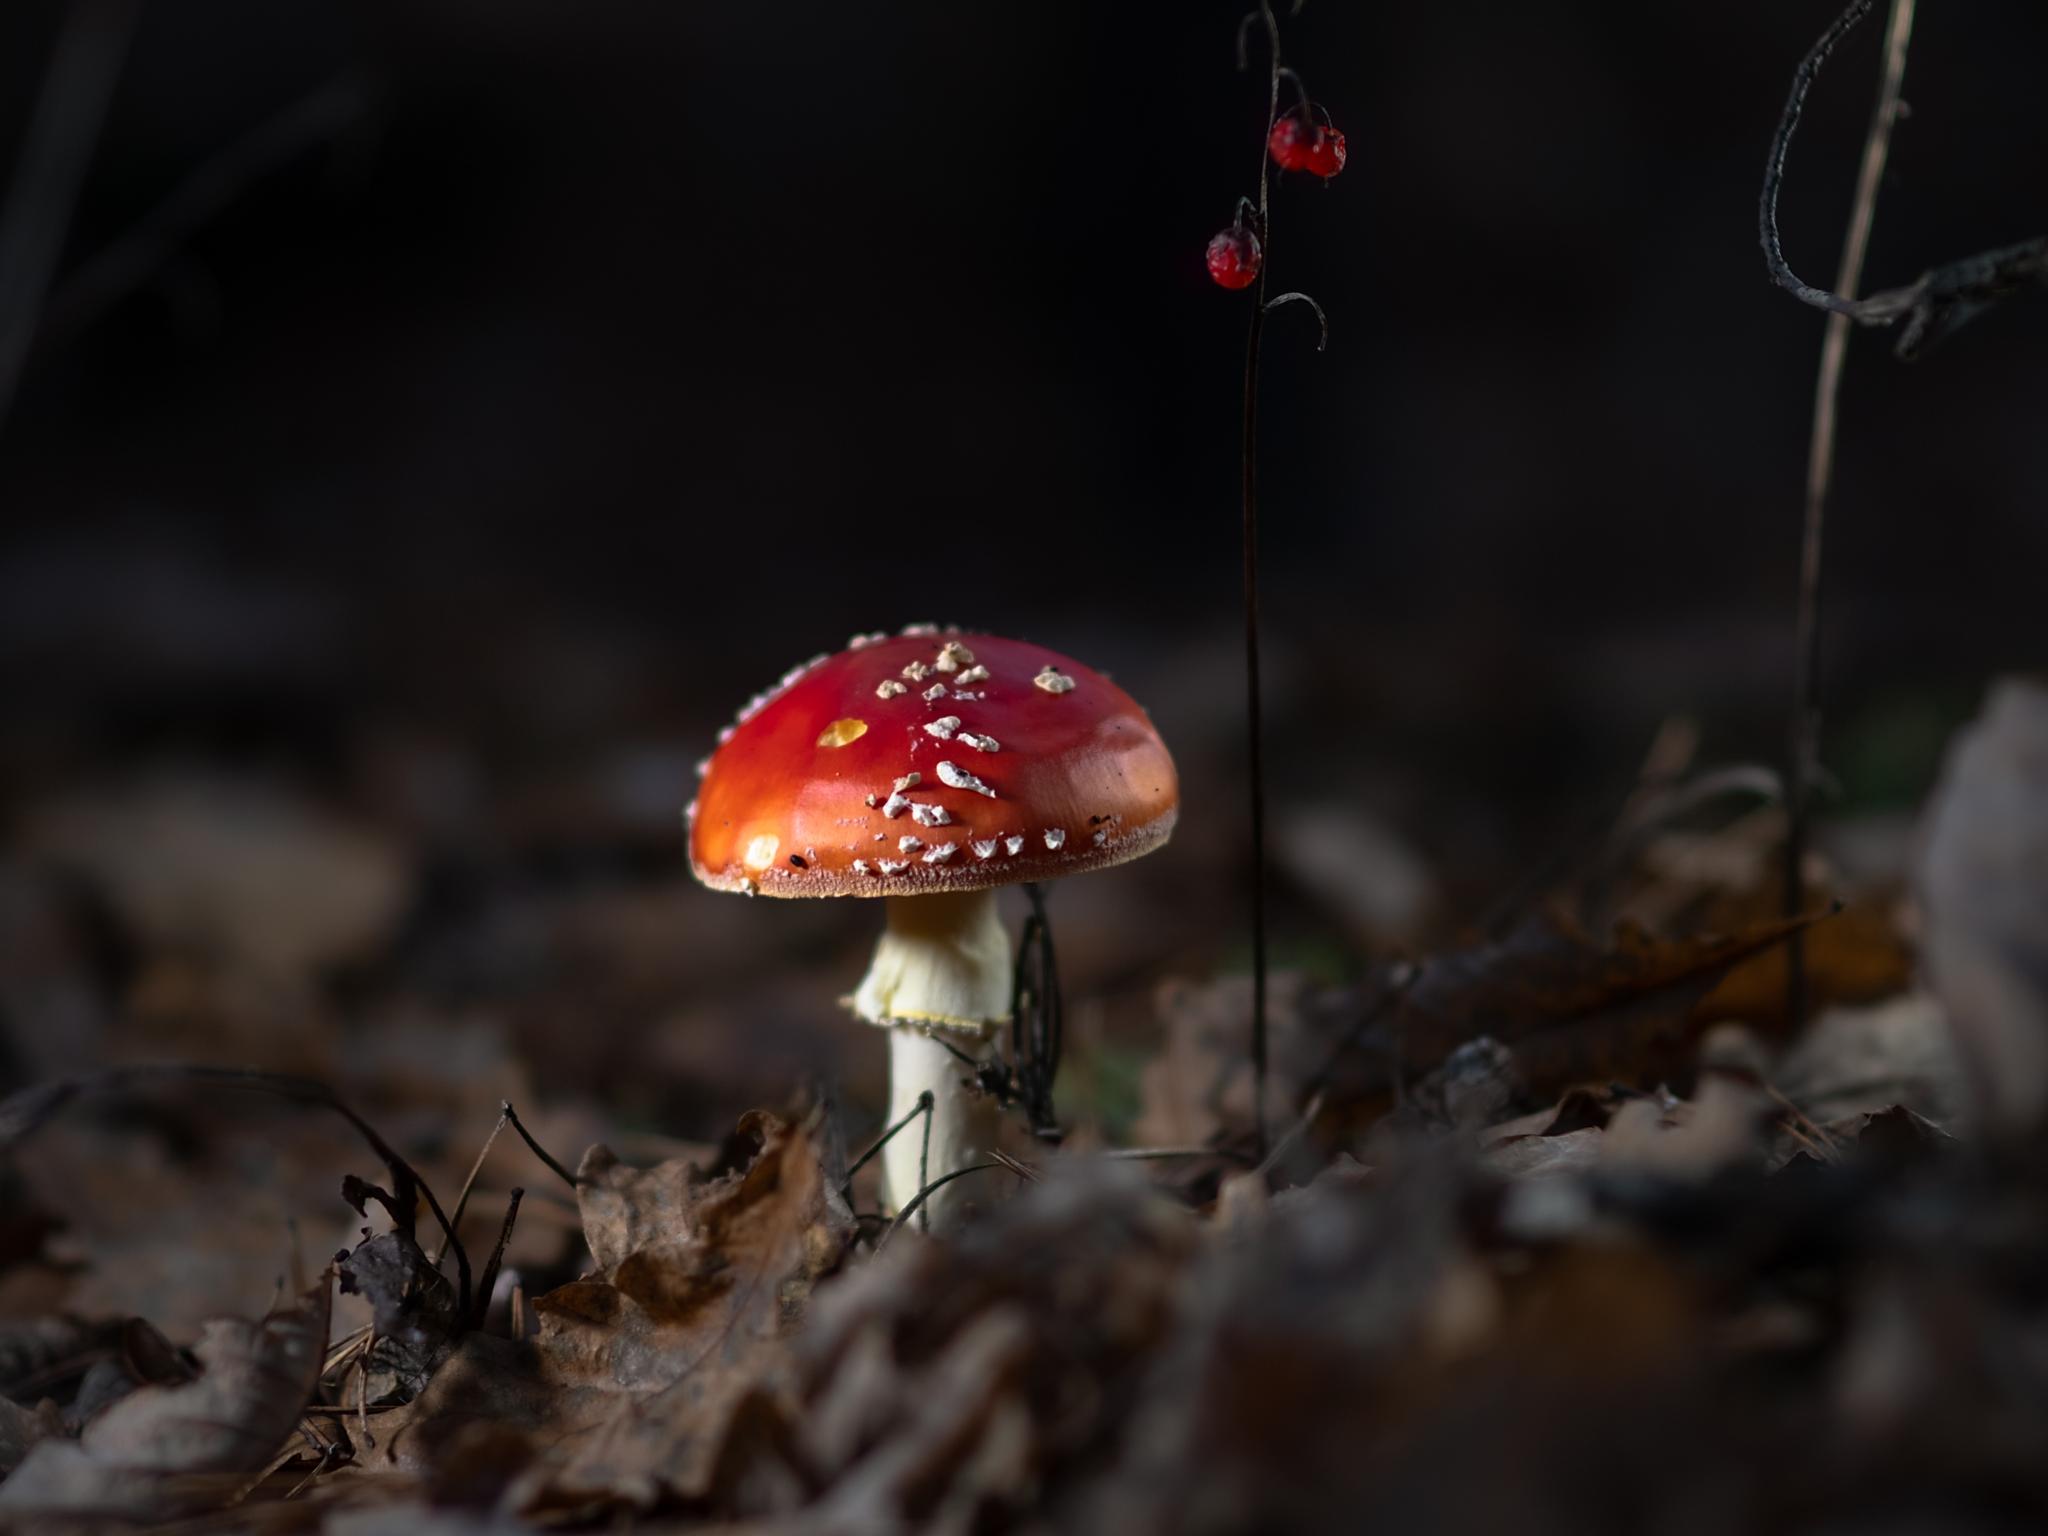  amanita-muscaria-mushrooms-are-taking-the-lead-in-markets-as-research-ramps-up 